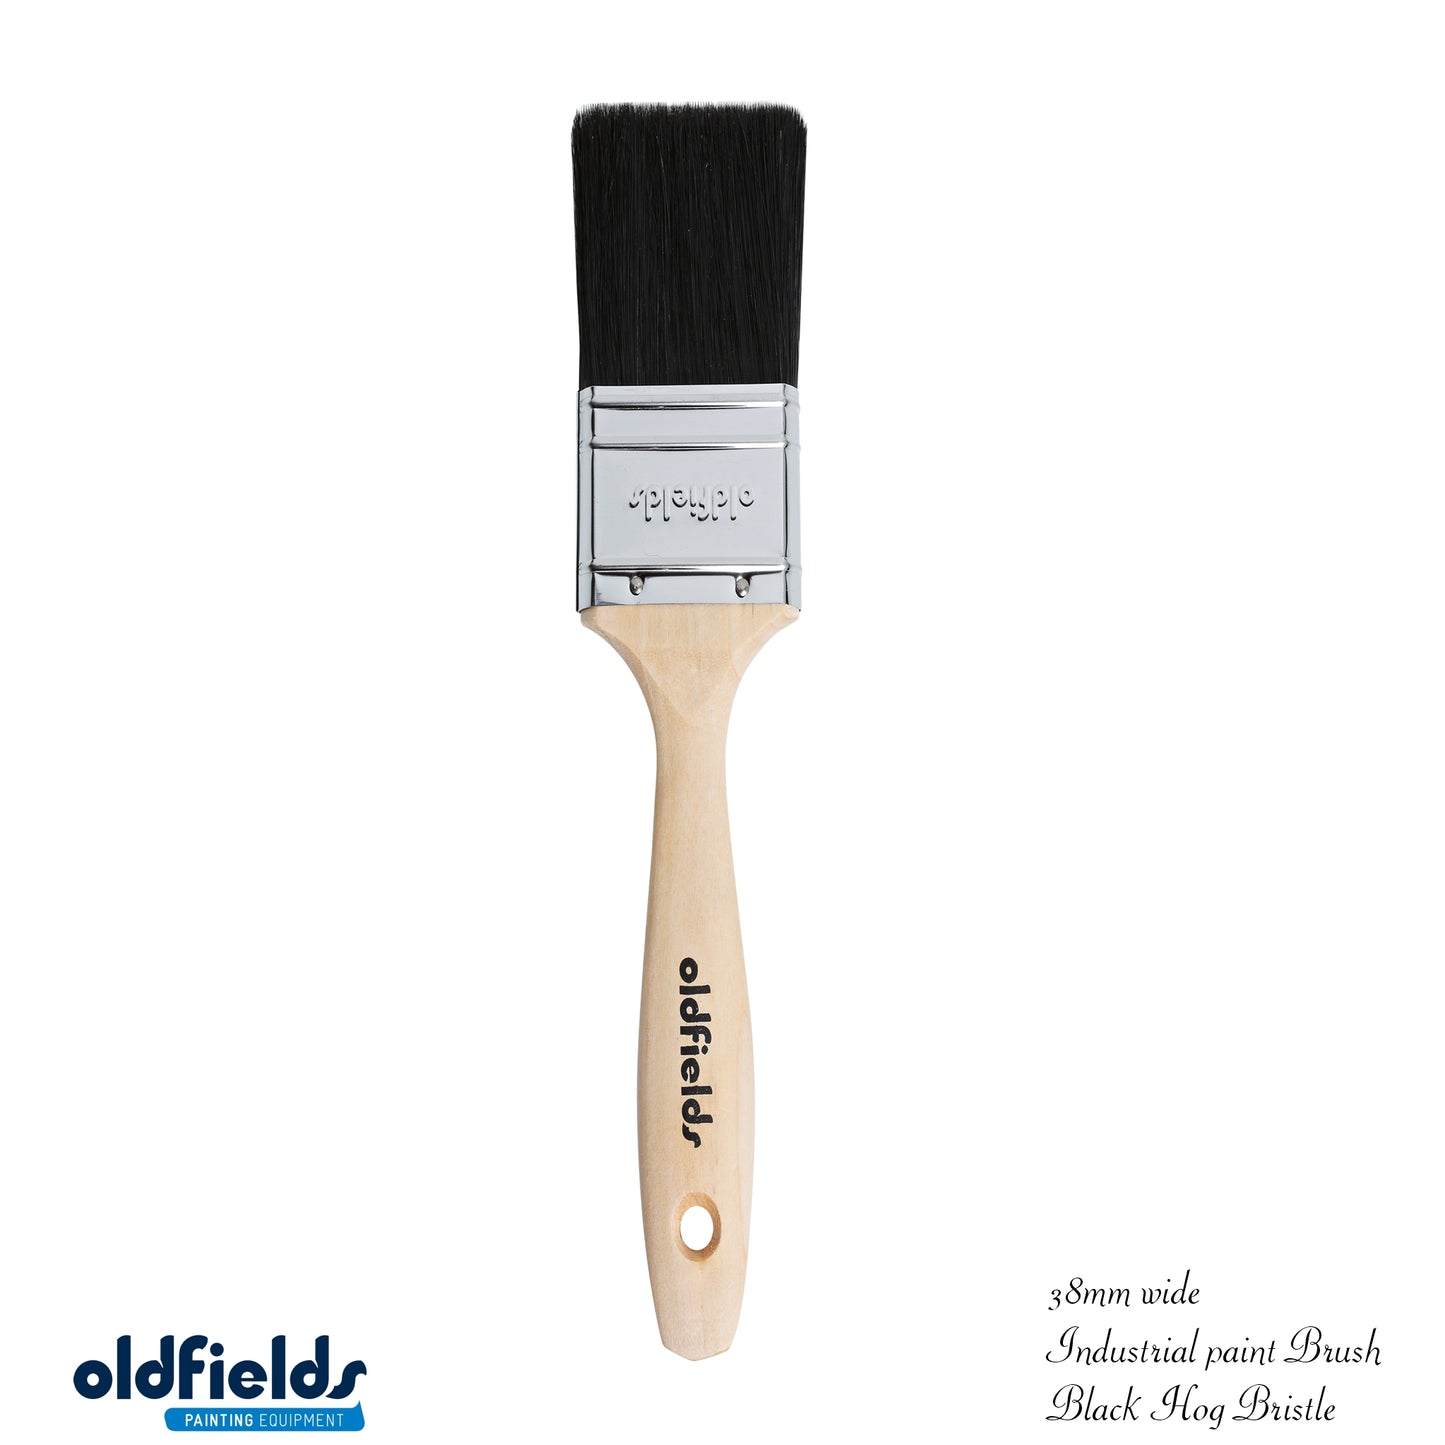 Industrial Paint Brush form Oldfields (great for waxing) - Da Vinci Chalk Paint & Rustic home decor